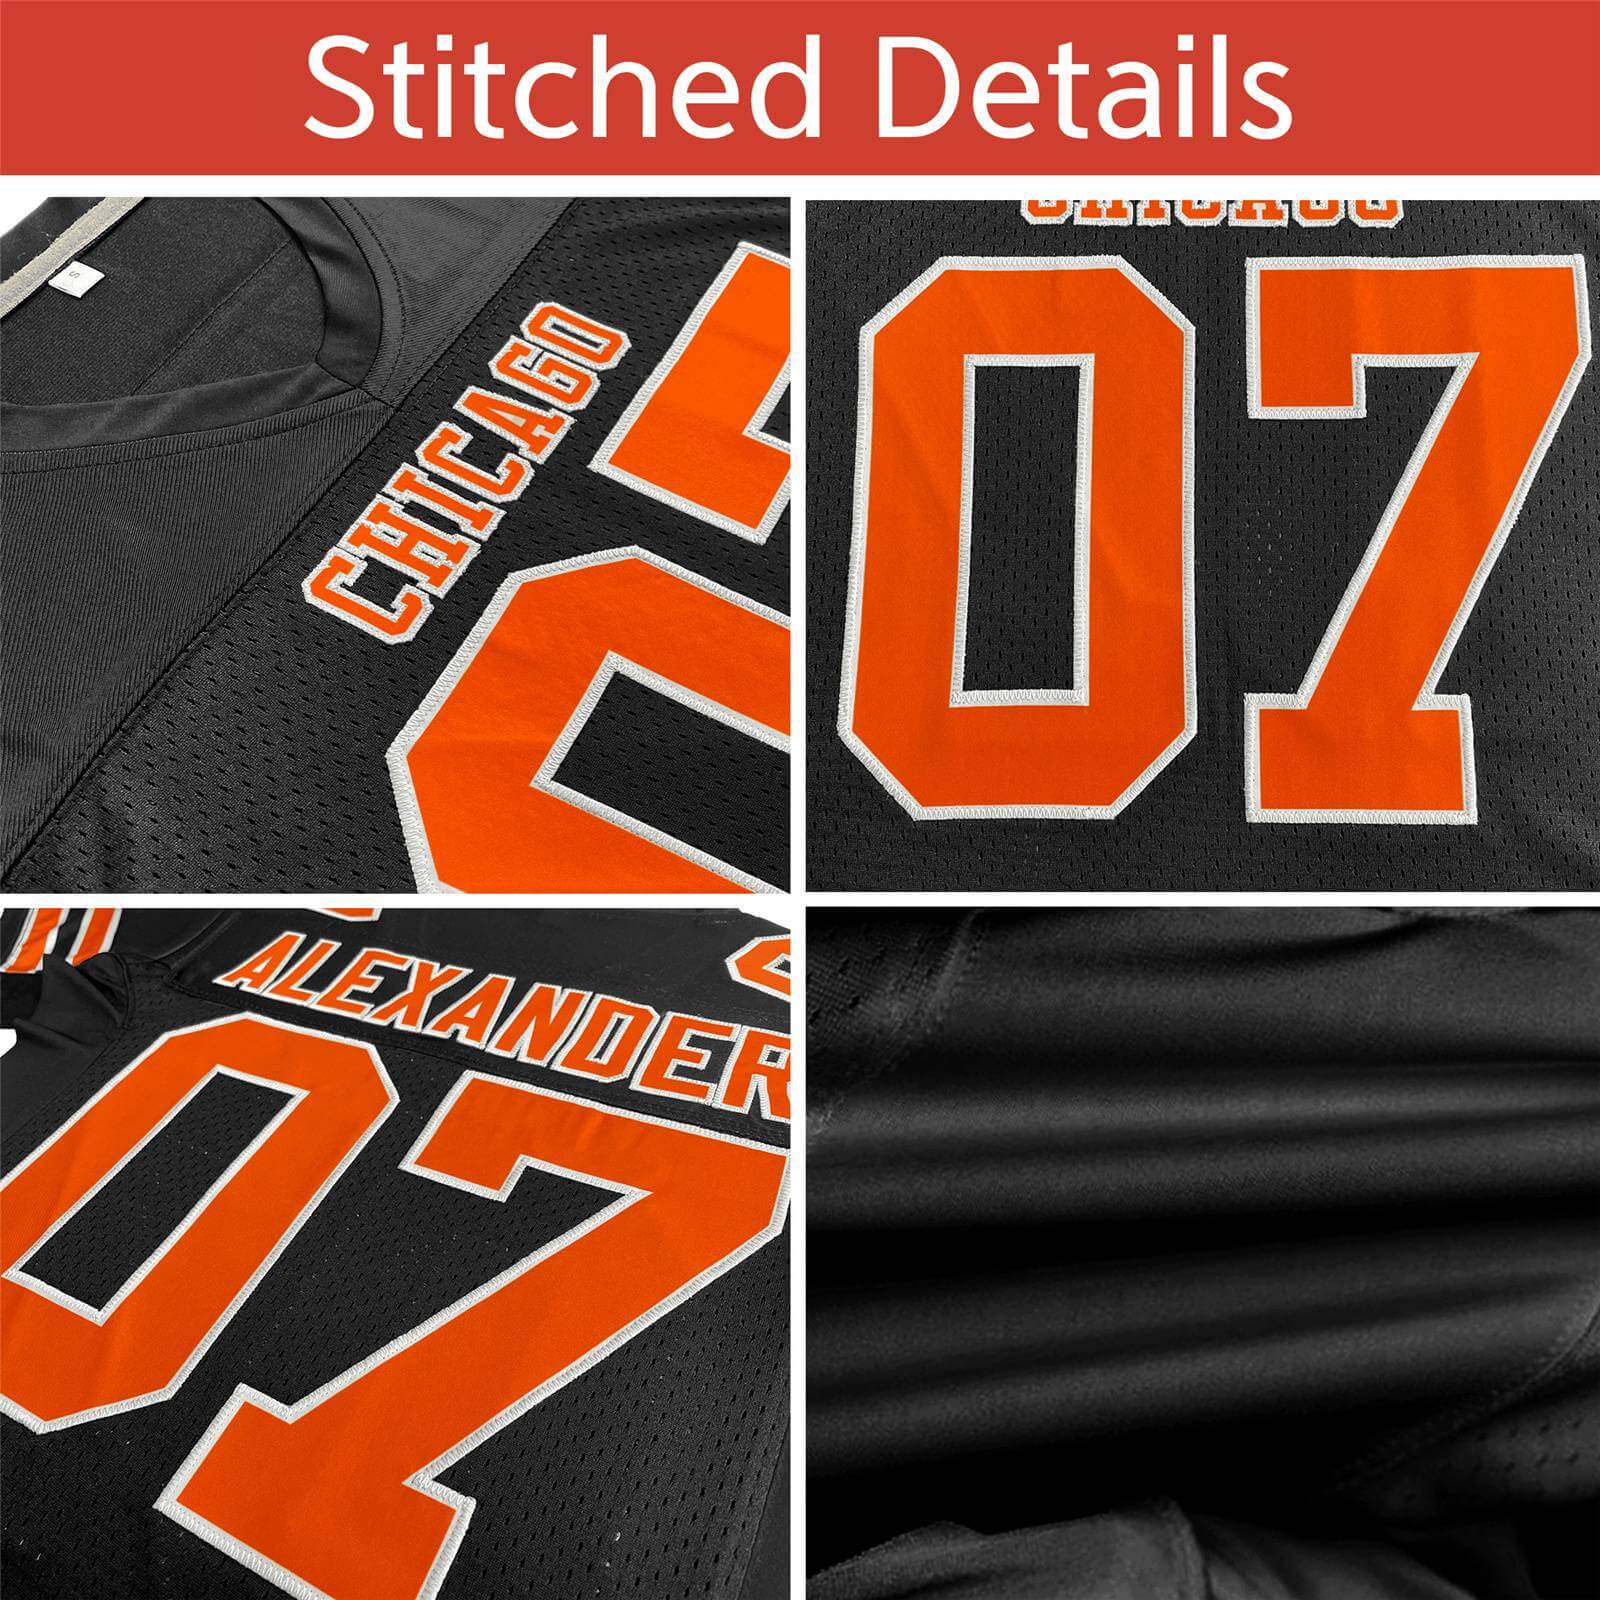 american football jersey stitched details